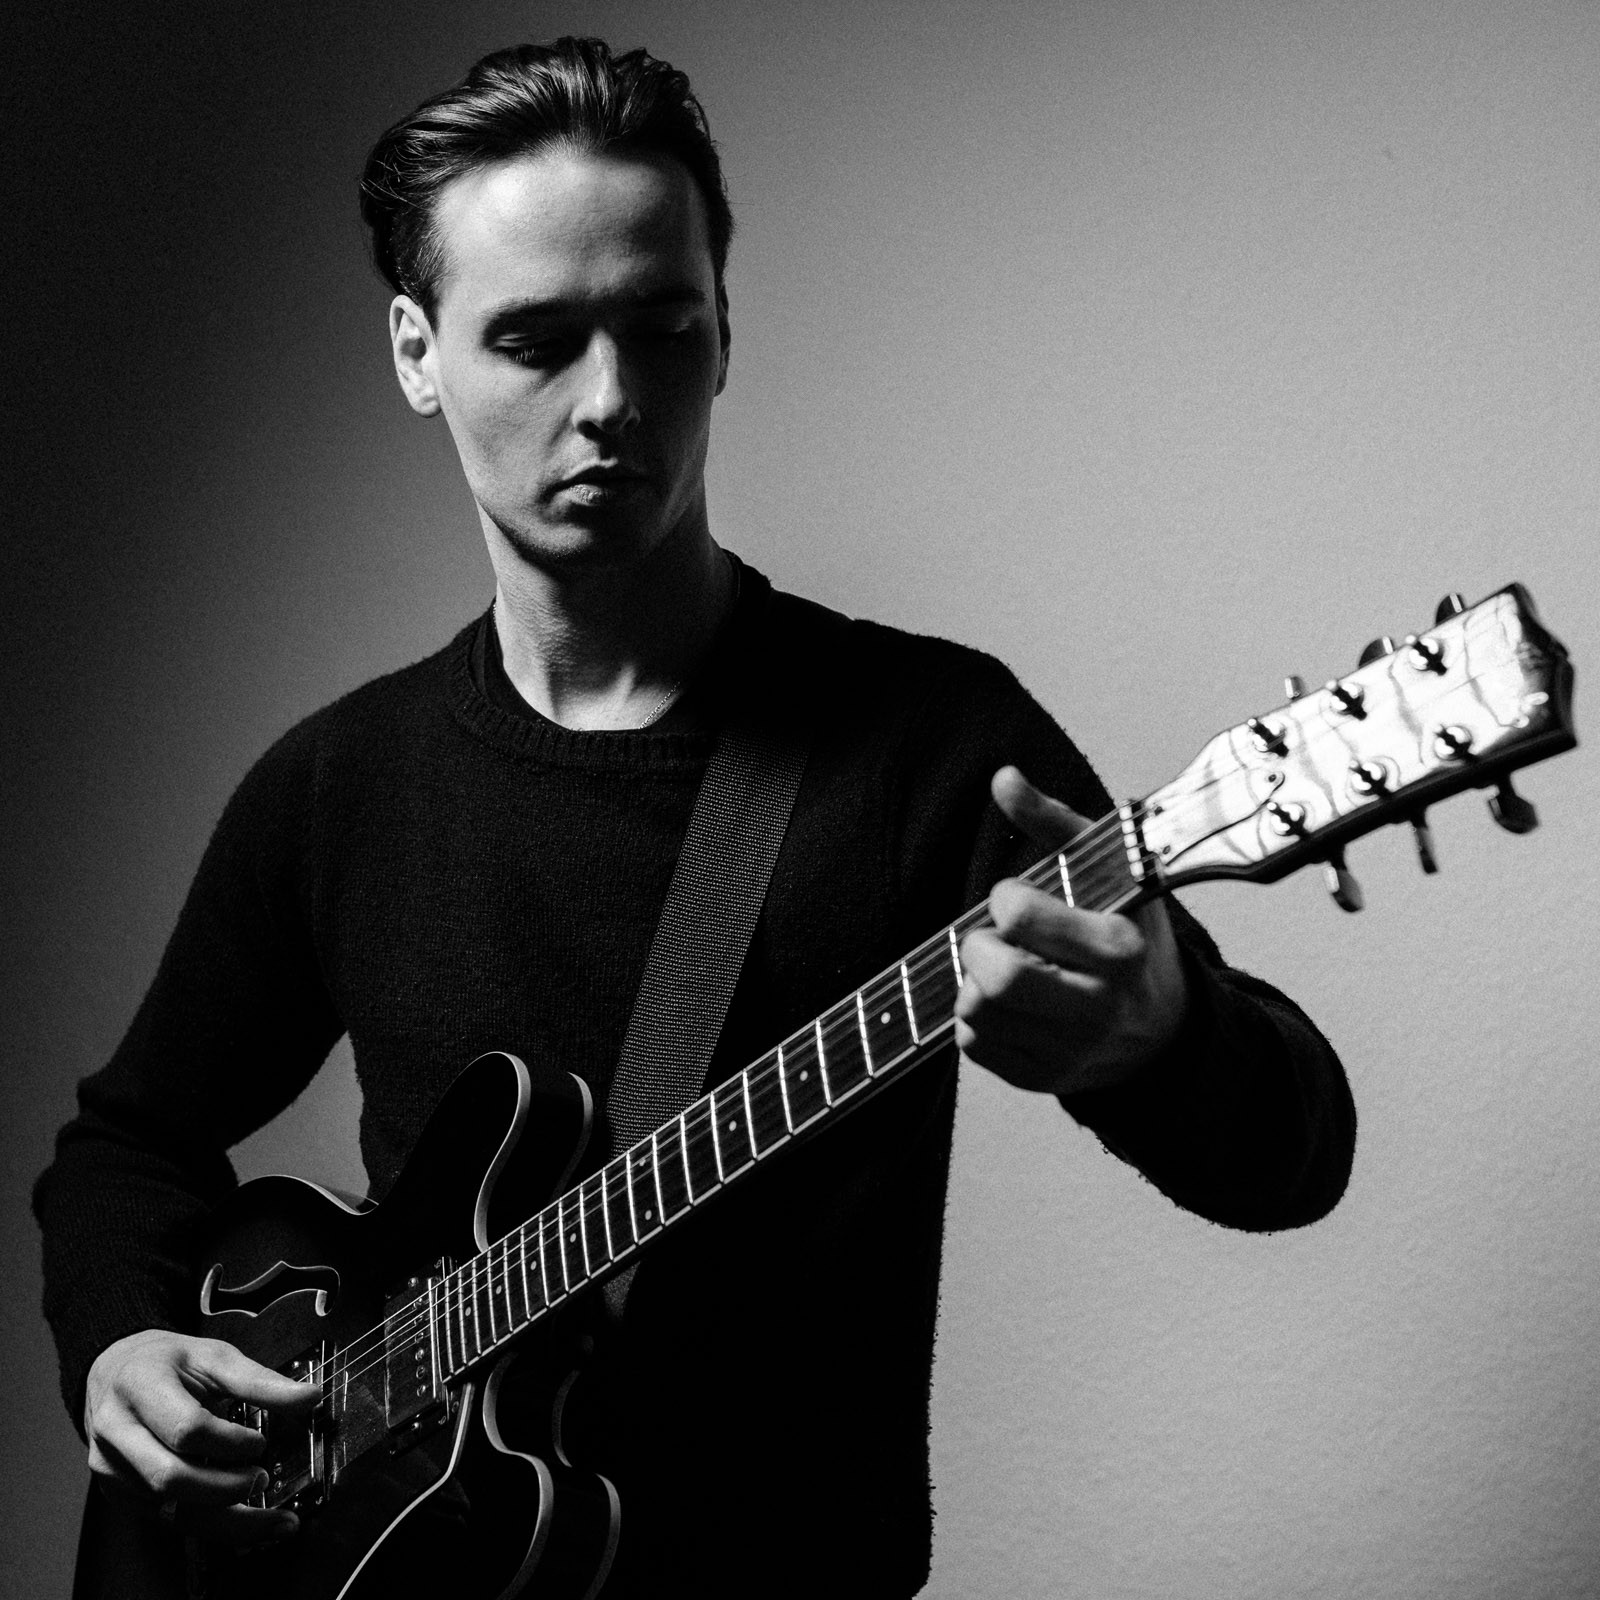 guitar musician black and white portrait shadow